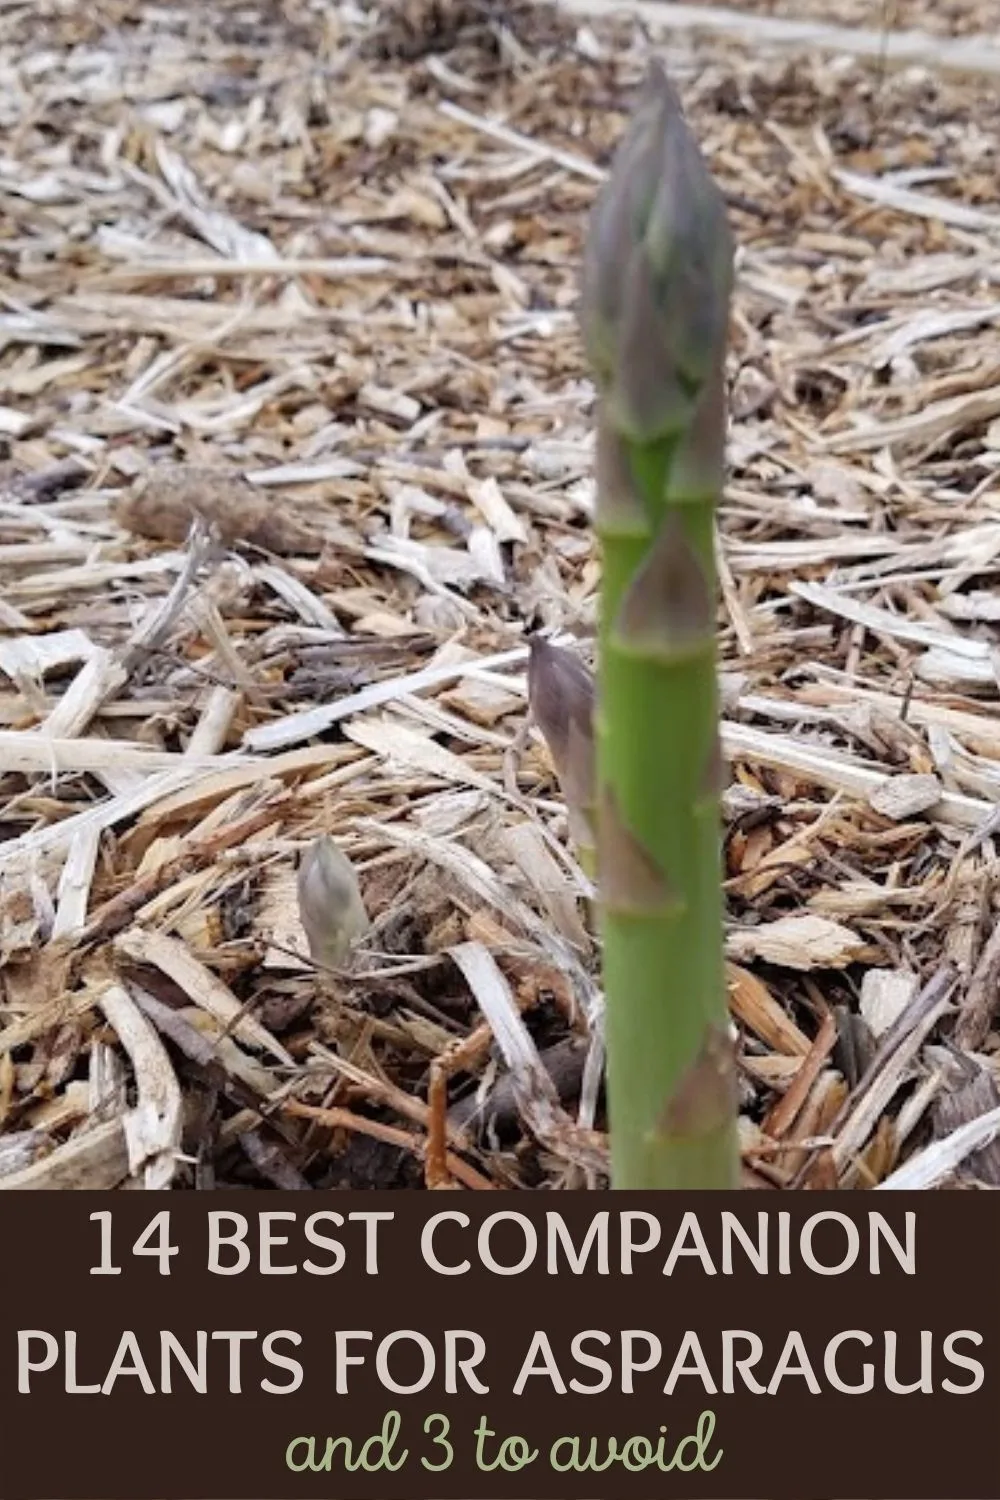 14 best companion plants for asparagus and 3 to avoid